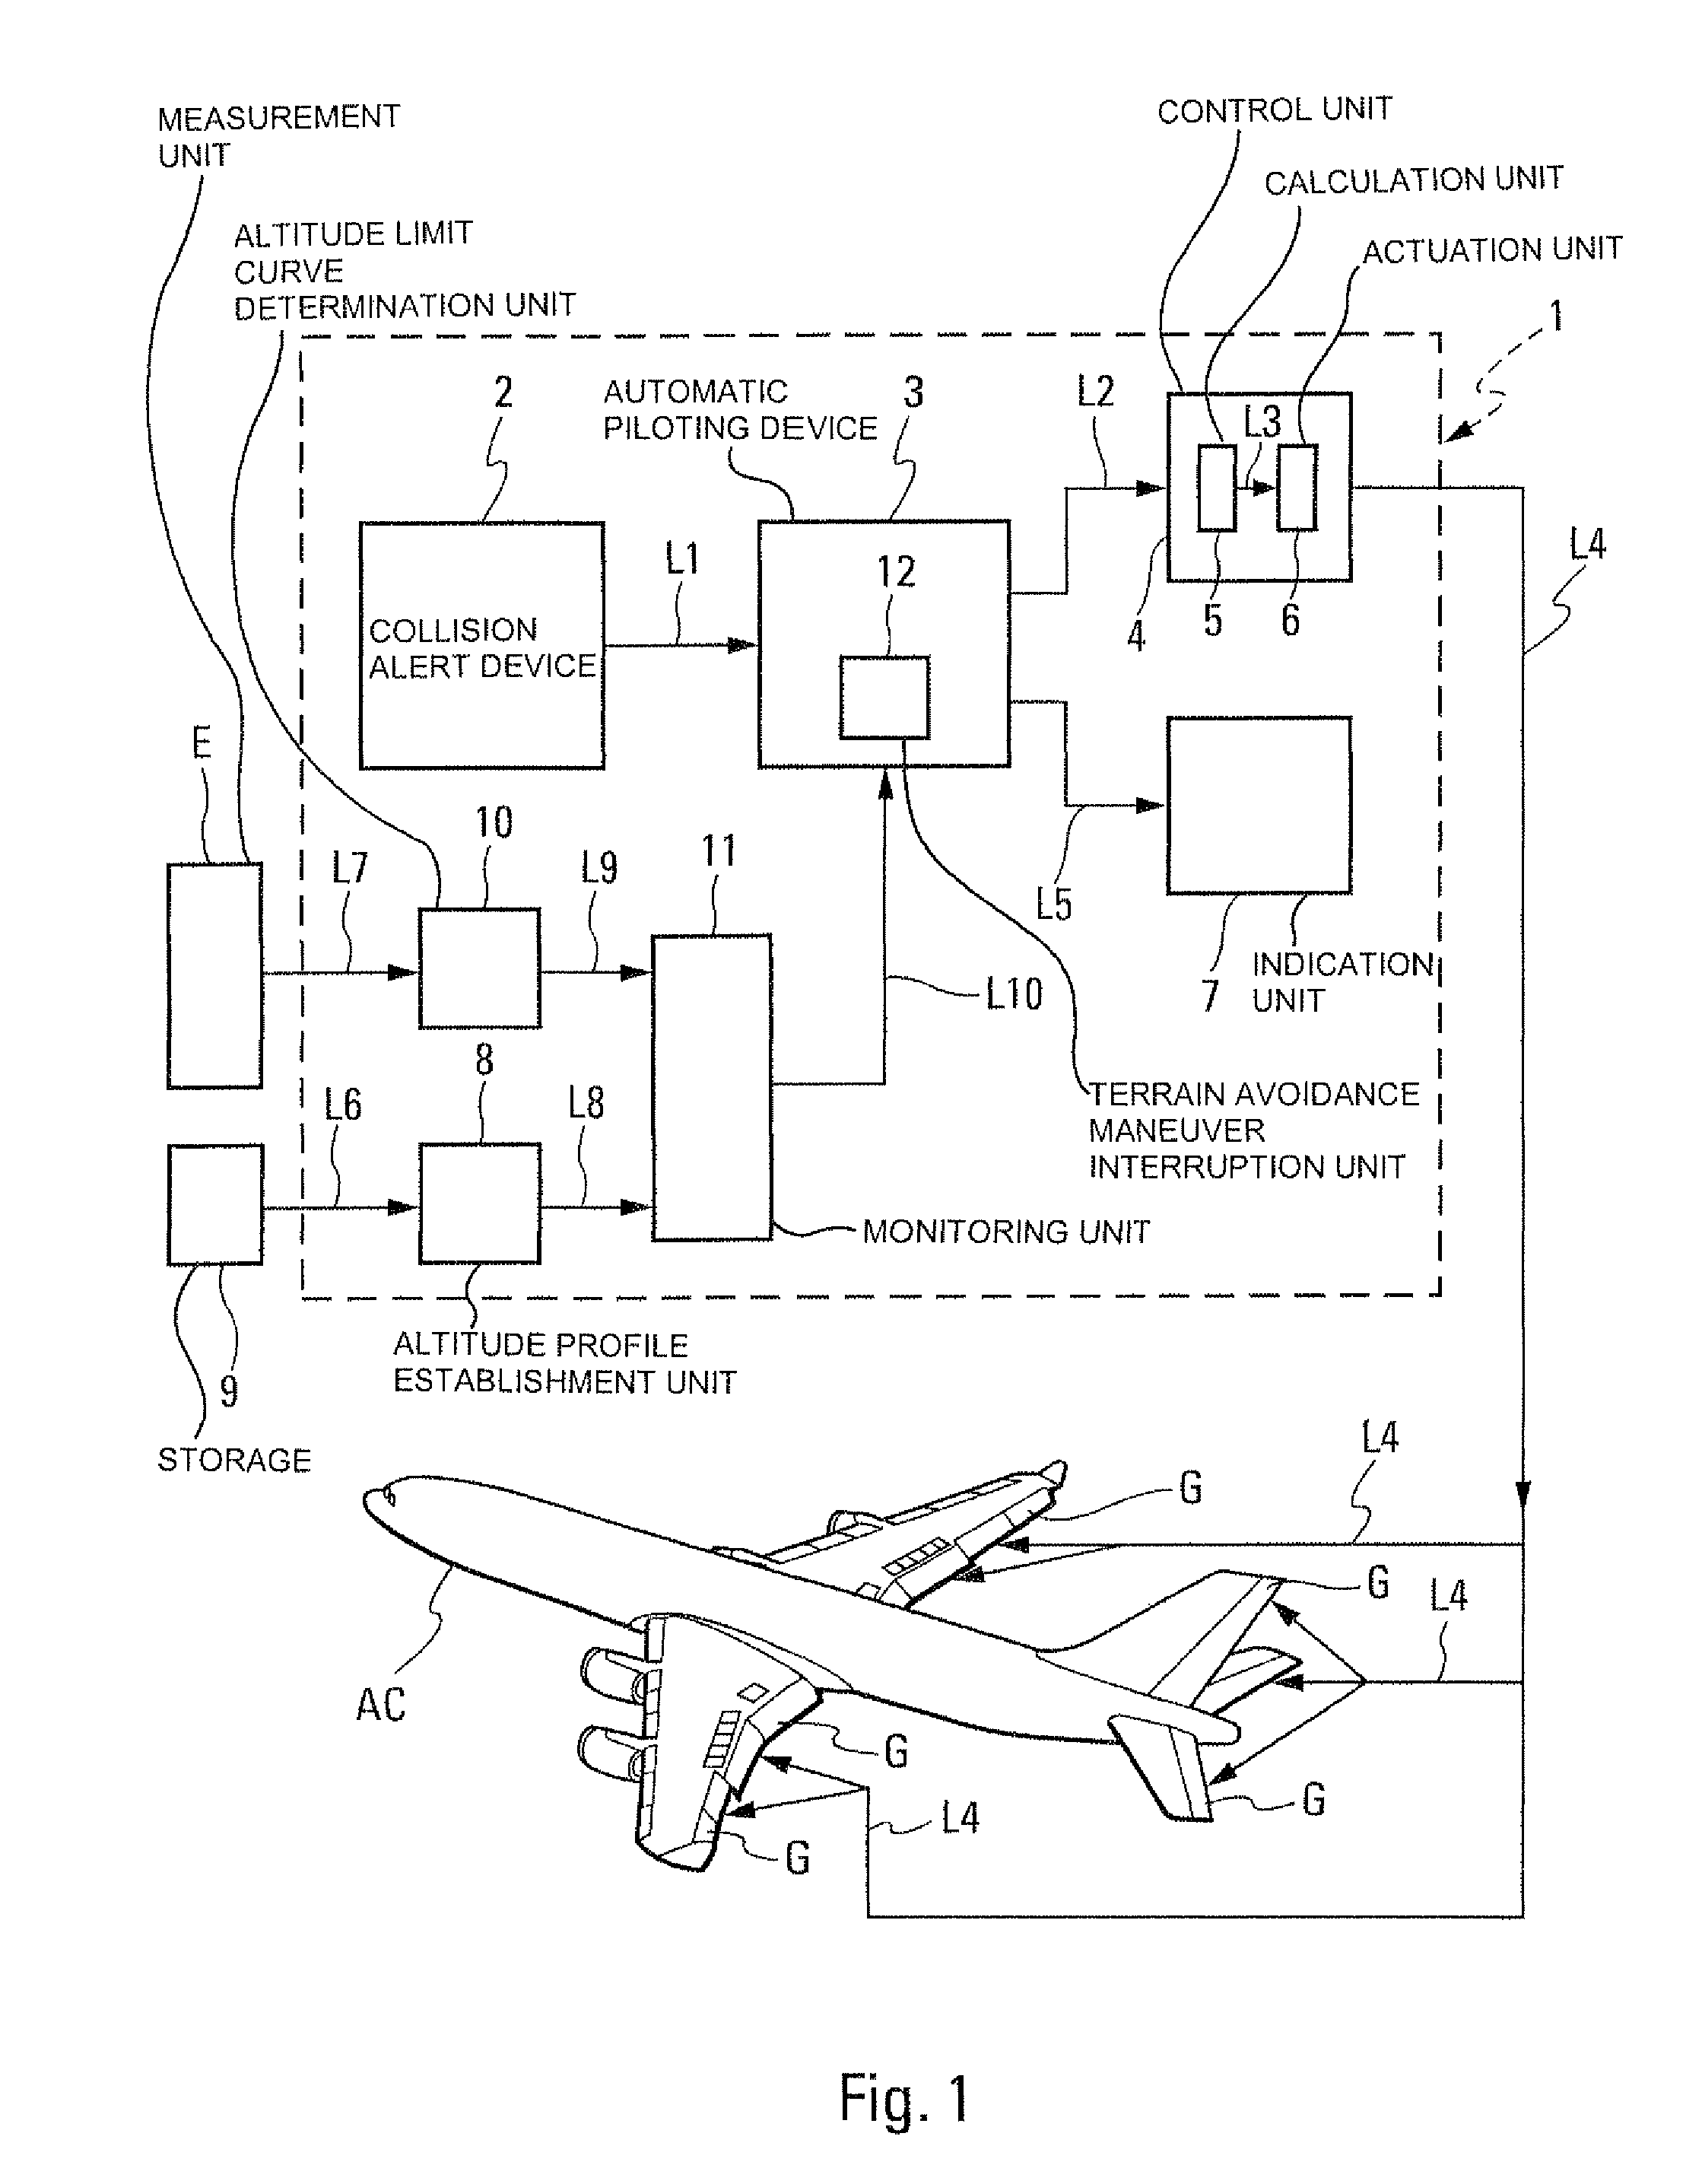 Method and device of terrain avoidance for an aircraft